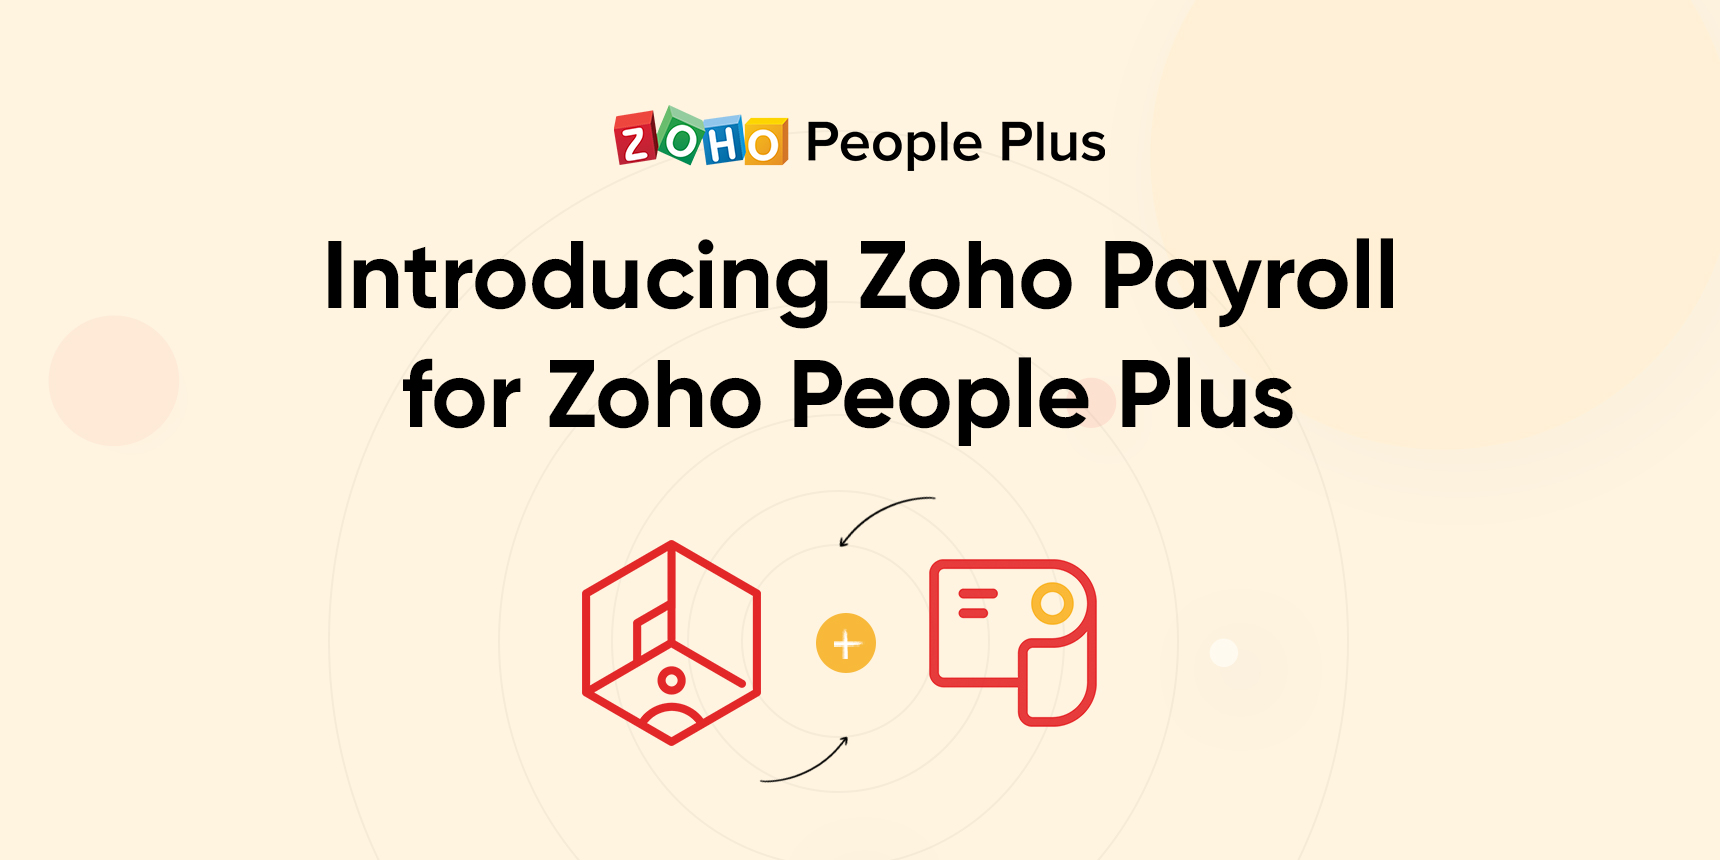 Introducing Zoho Payroll for Zoho People Plus: Put an end to payroll errors